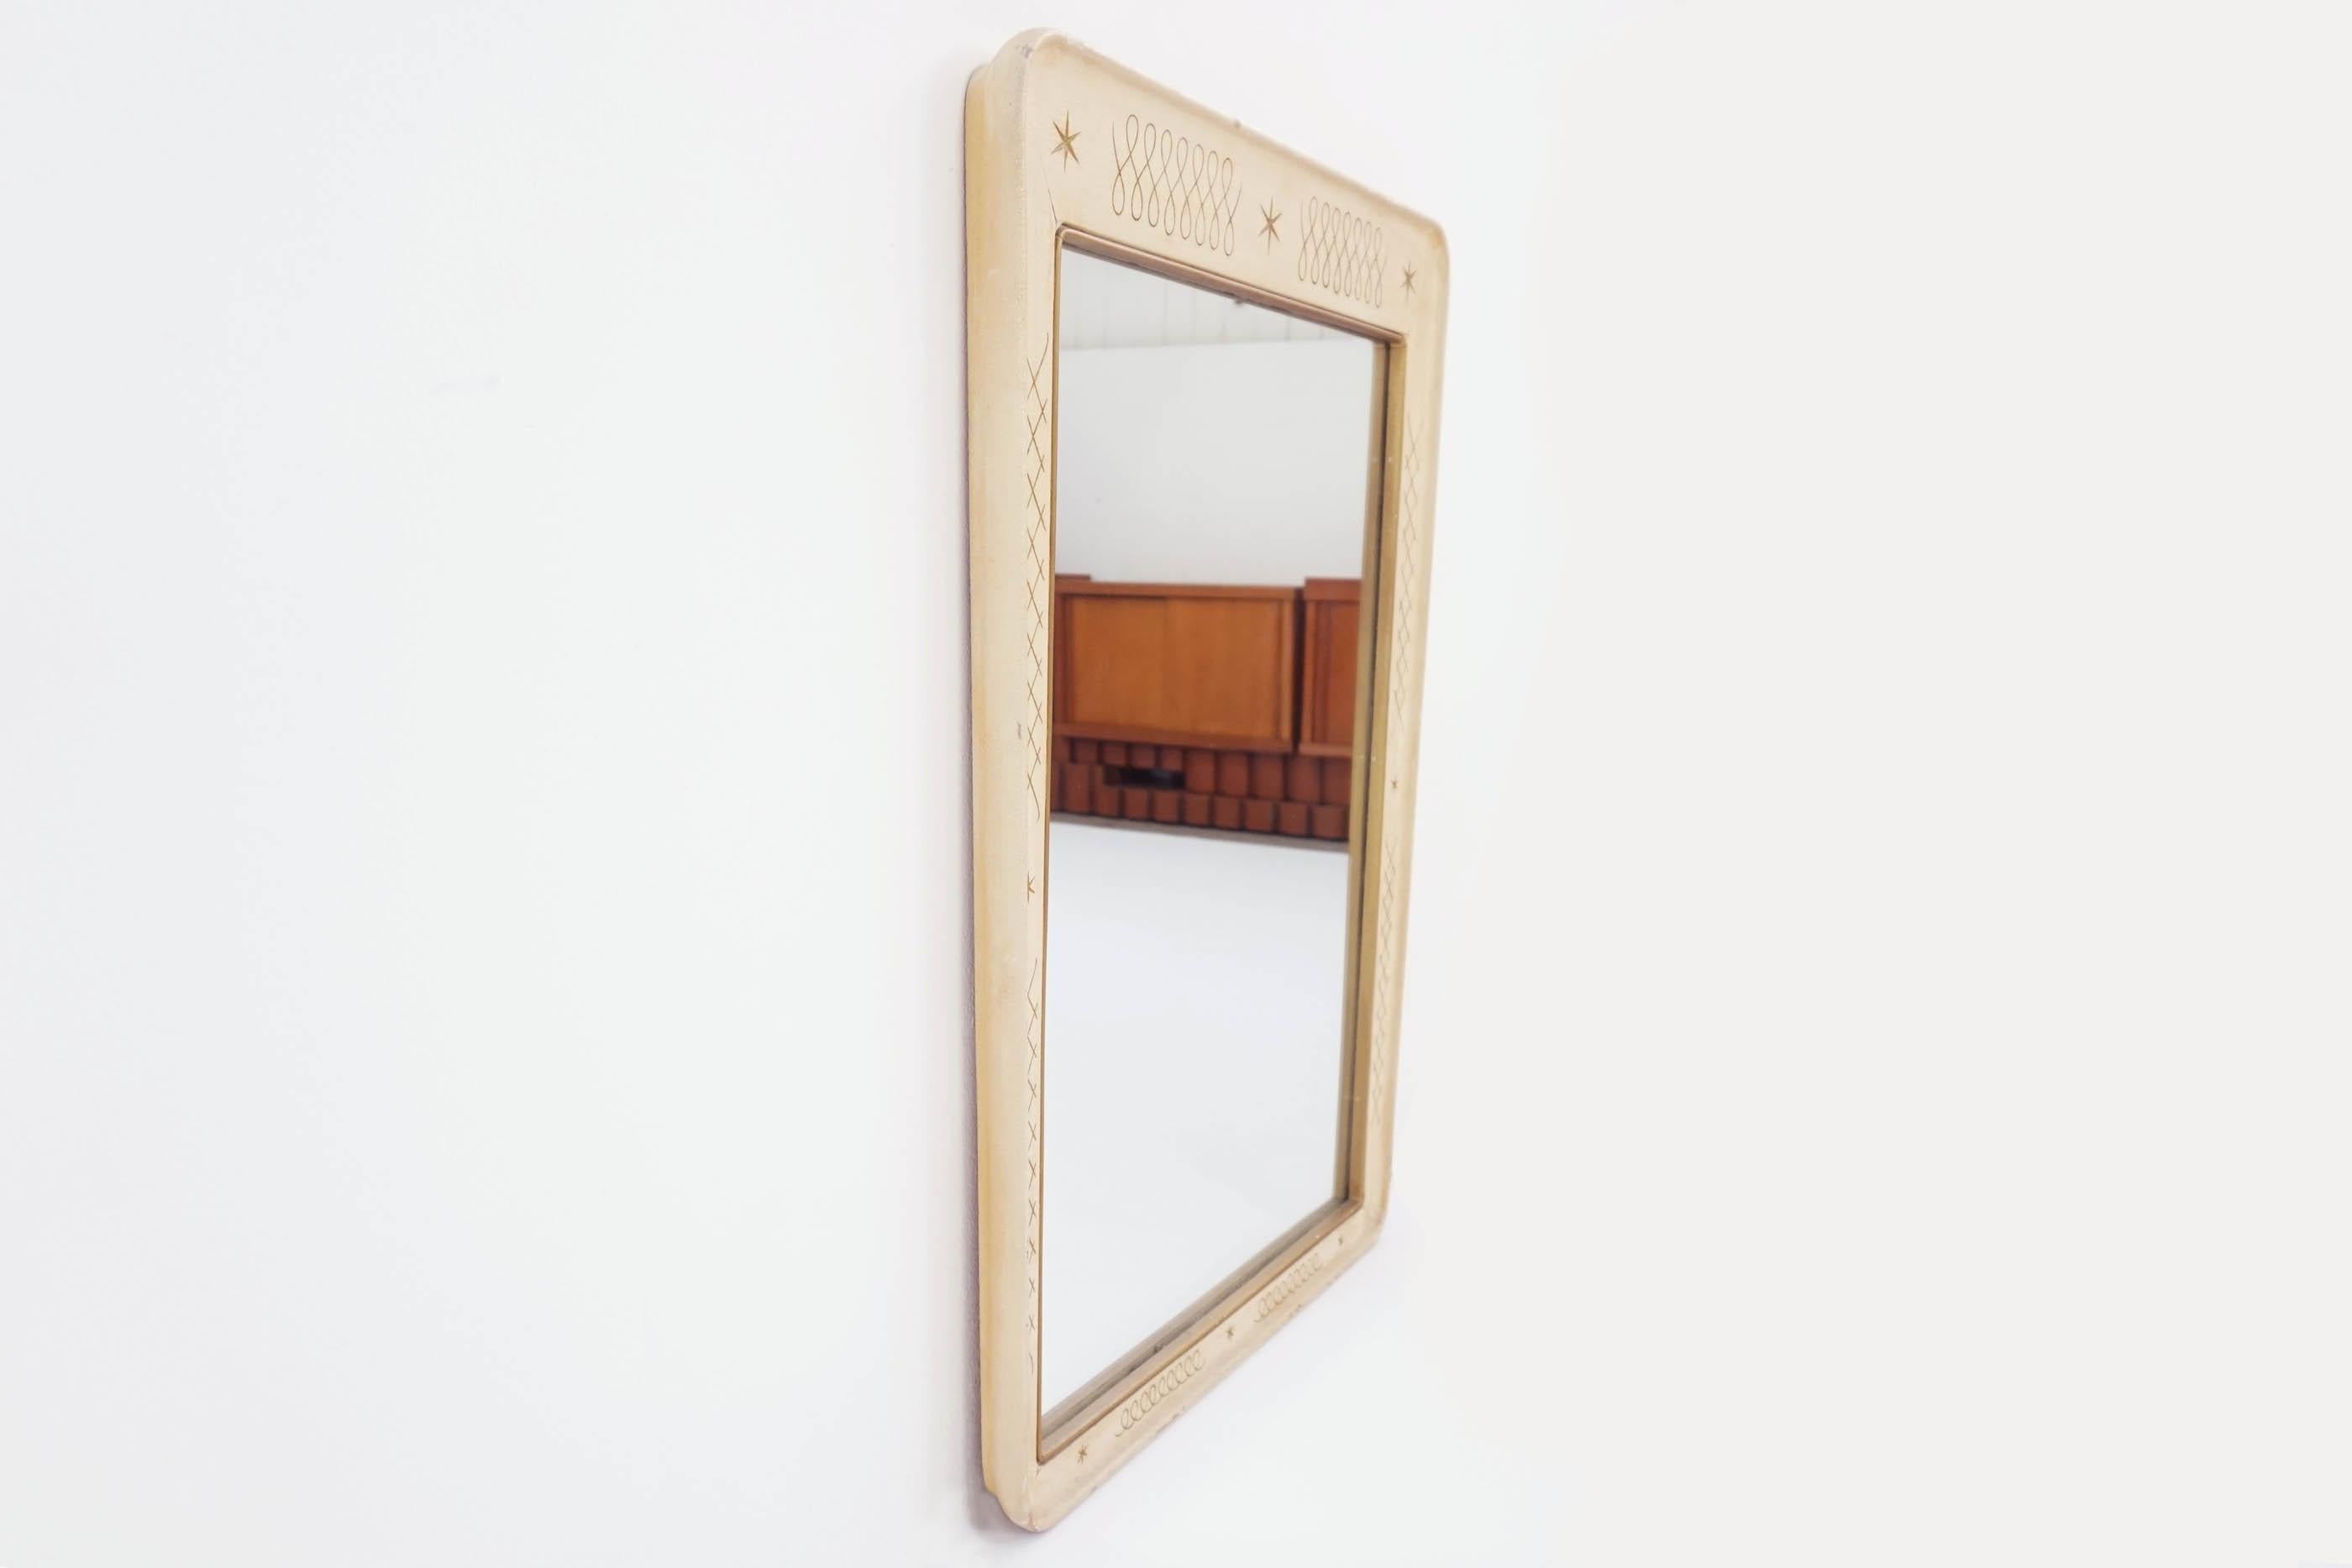 Mid-Century Modern Osvaldo Borsani, Atelier Mirror 1950, Turned Lacqued Wood with Engraved Stars For Sale